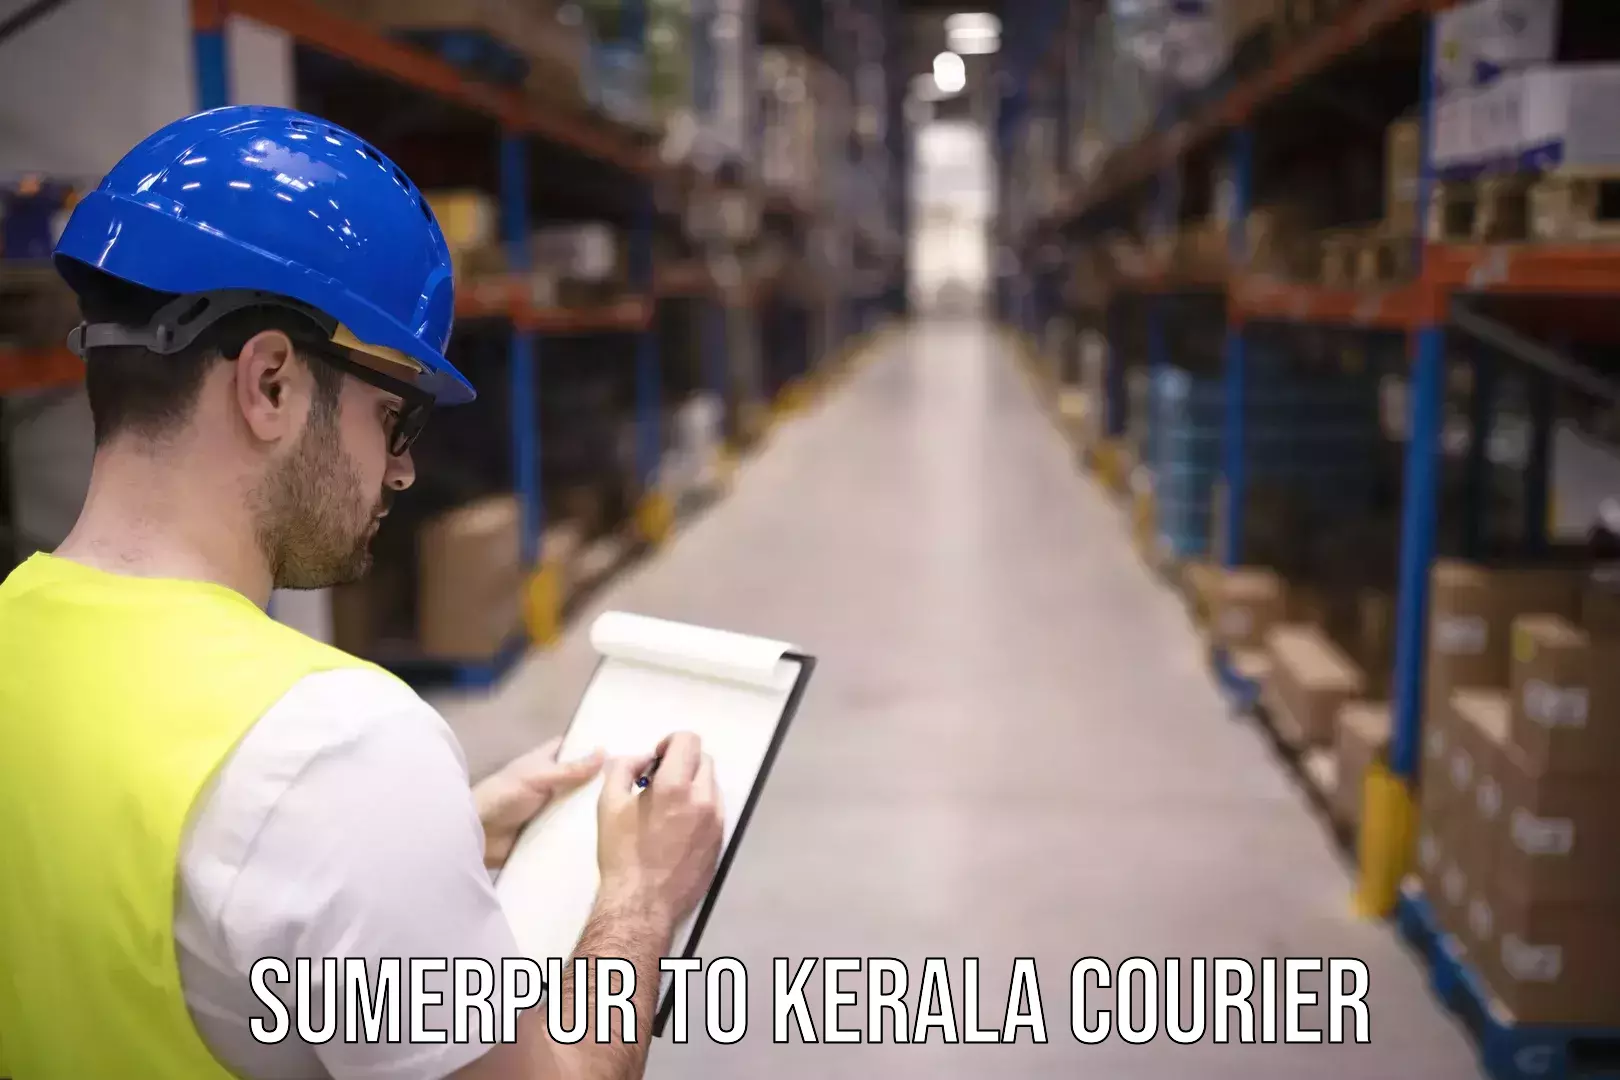 Courier service partnerships Sumerpur to Kerala